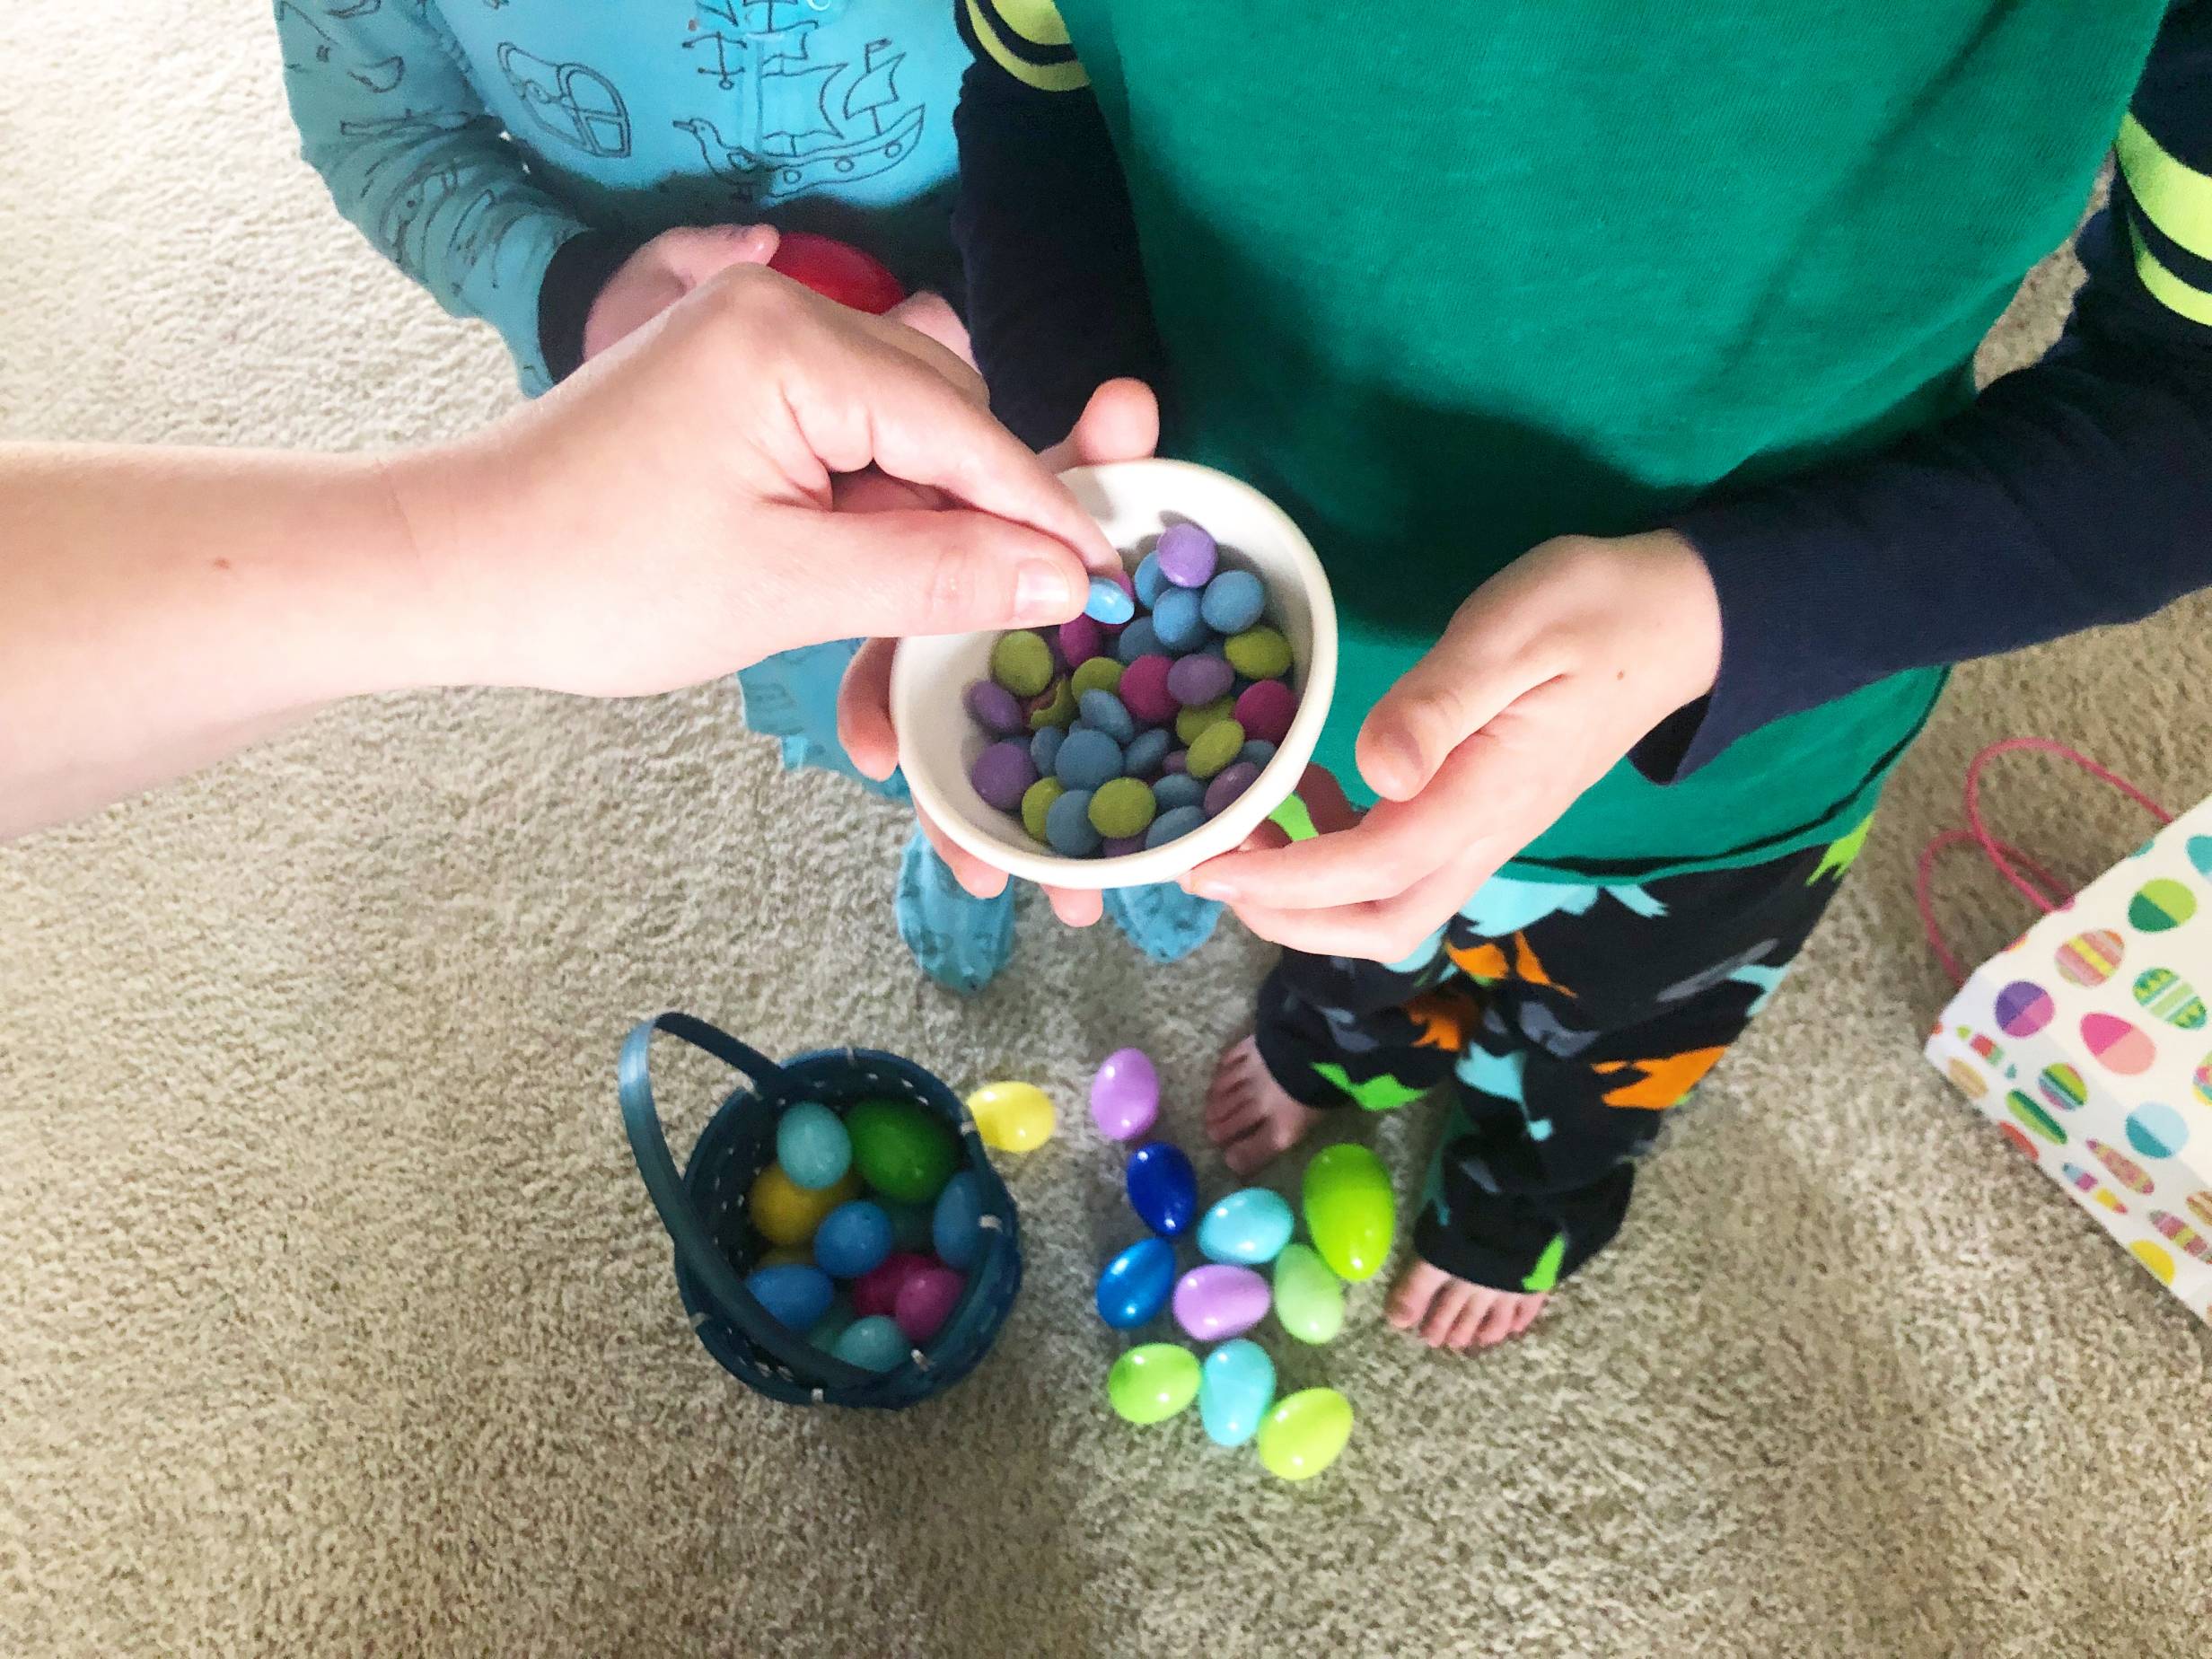 A bowl of multi-colored candy chocolates is held by a child in pajamas while an adult hand pinches a candy from the bowl. On the floor, there is a blue easter basket, many easter eggs, and a paper bag with easter eggs on it. Photo by Alyssa Buckley.